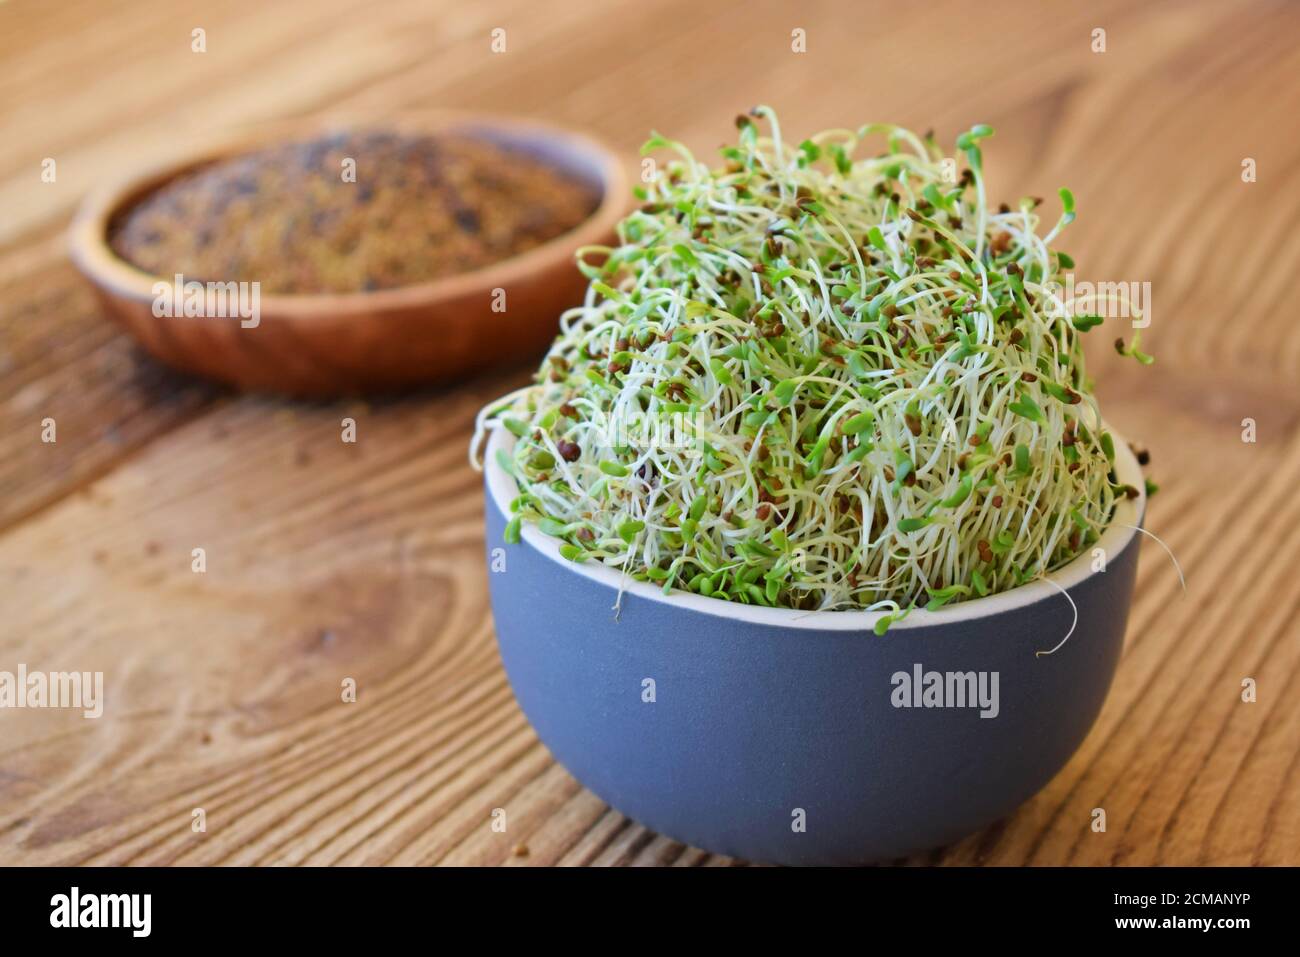 Sprouted alfalfa seeds in a bowl on wooden background Focus on sprouts in the front. Stock Photo